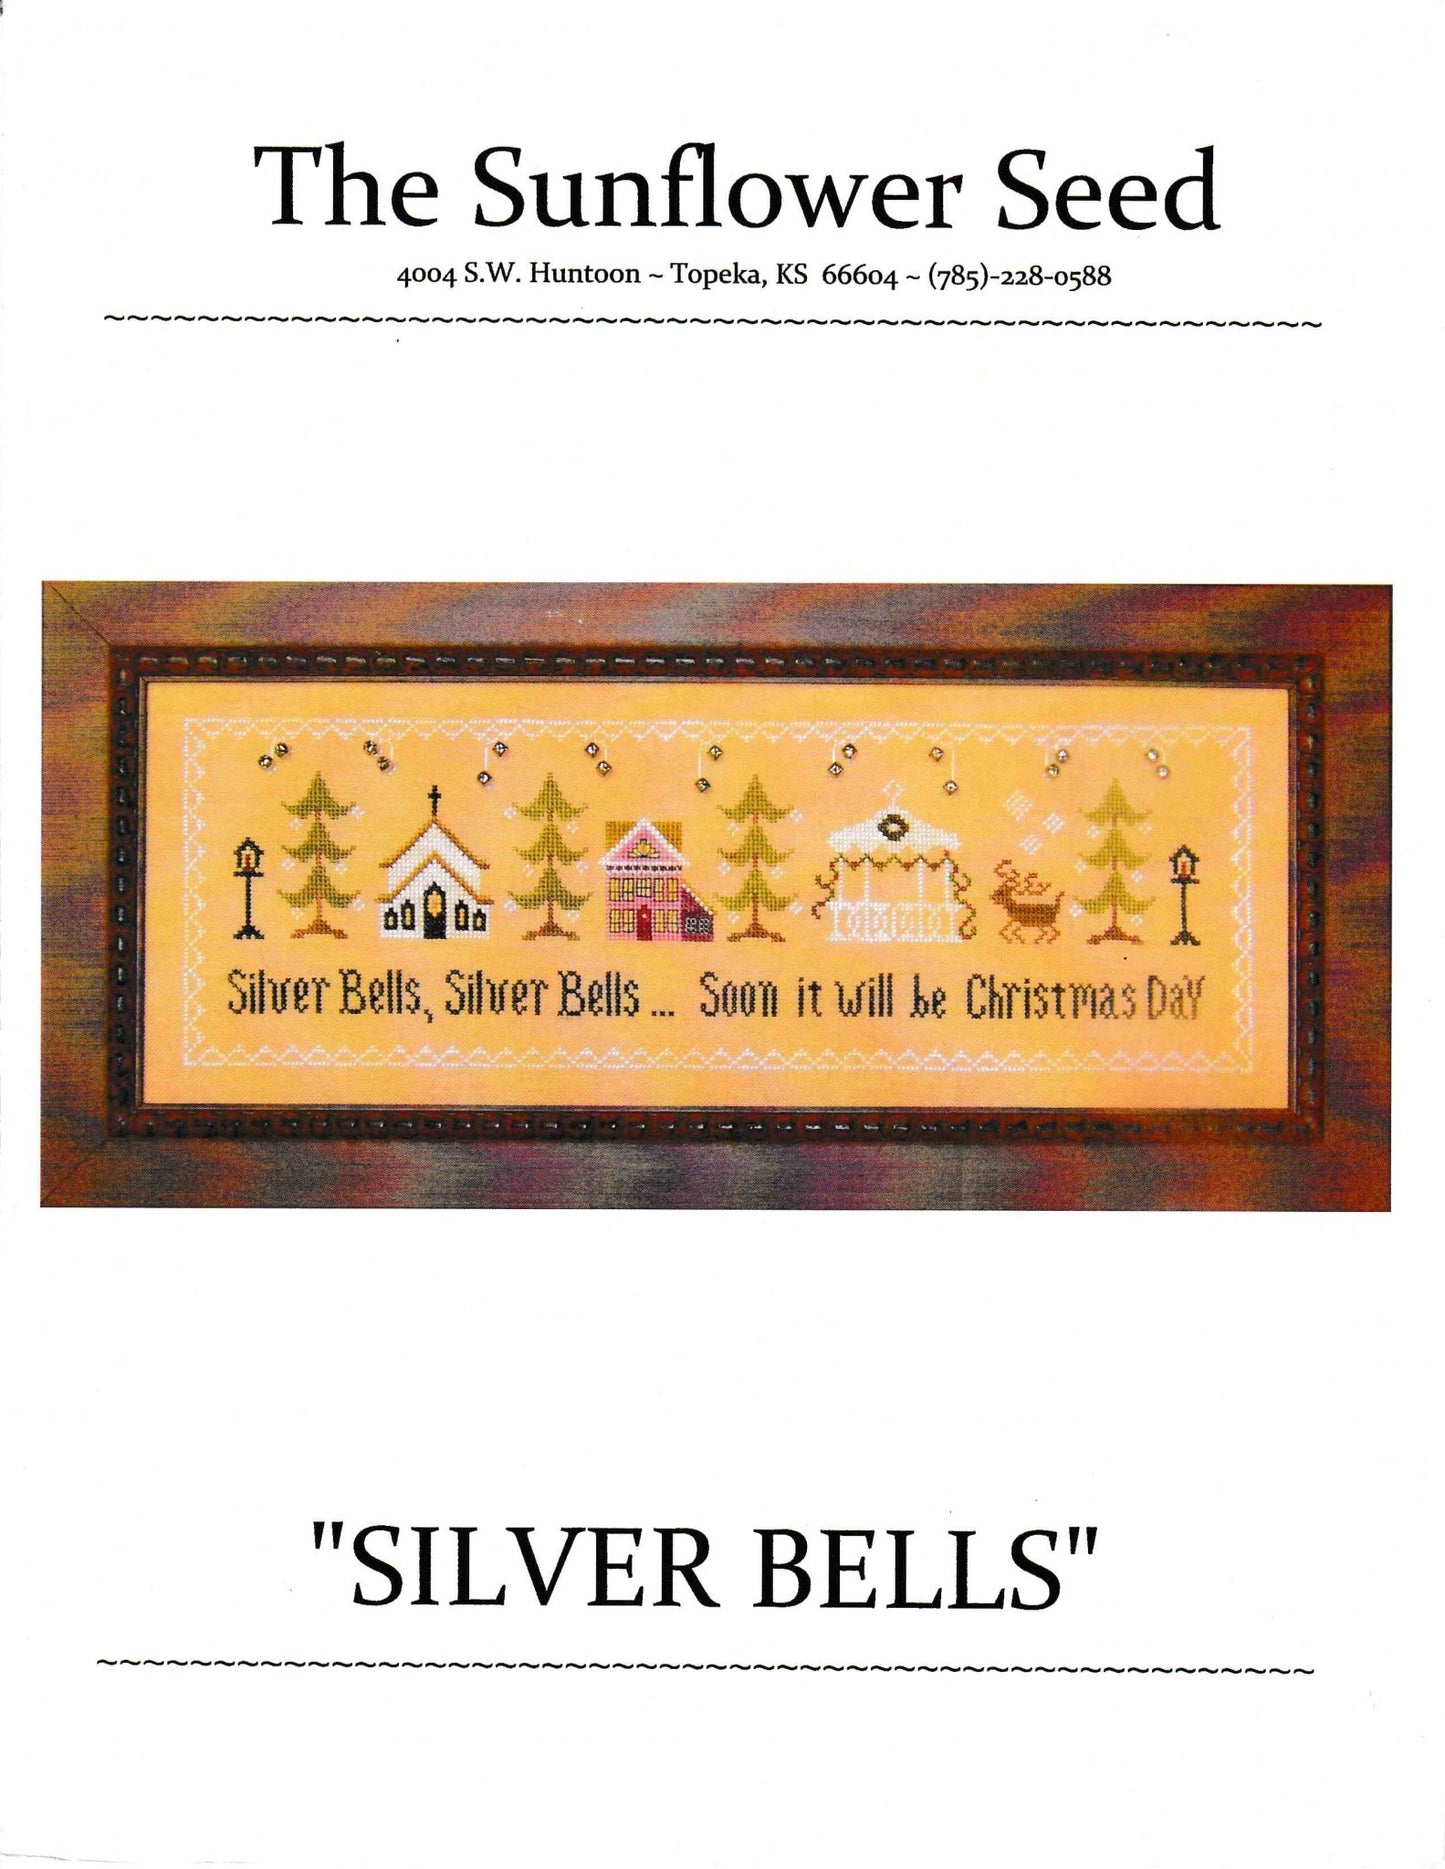 The Sunflower Seed Silver Bells